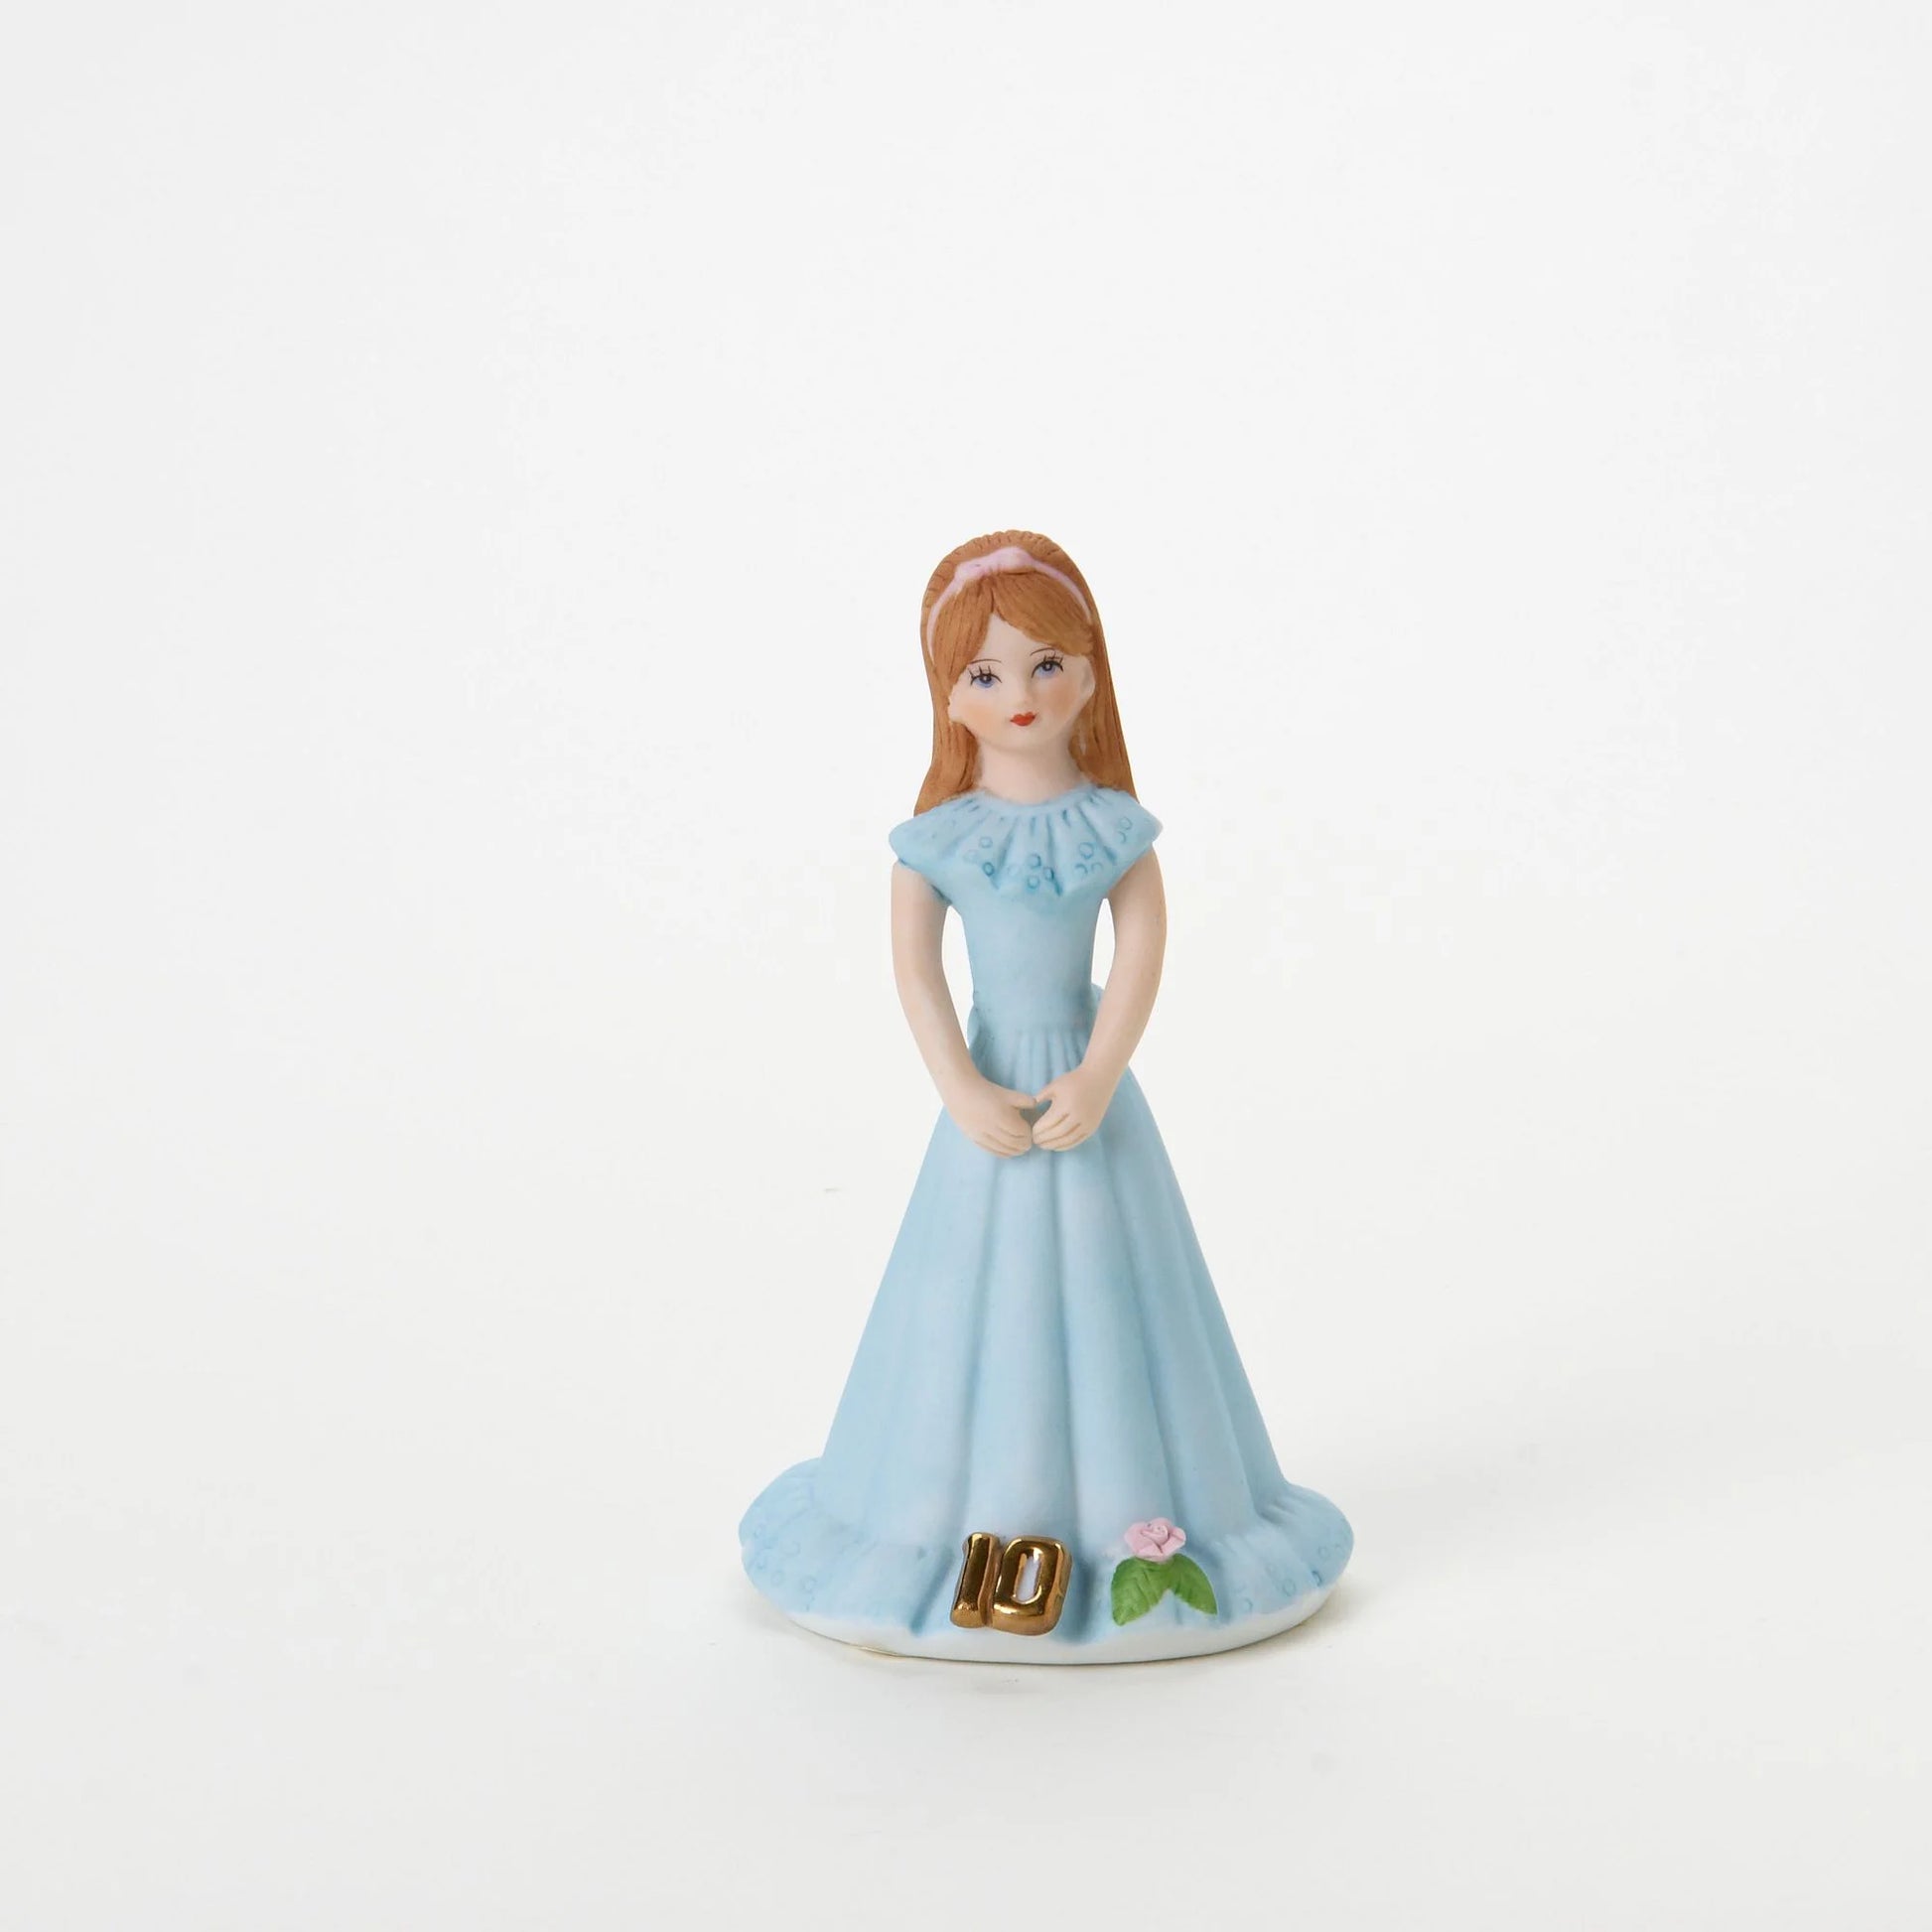 age 10 figurine front